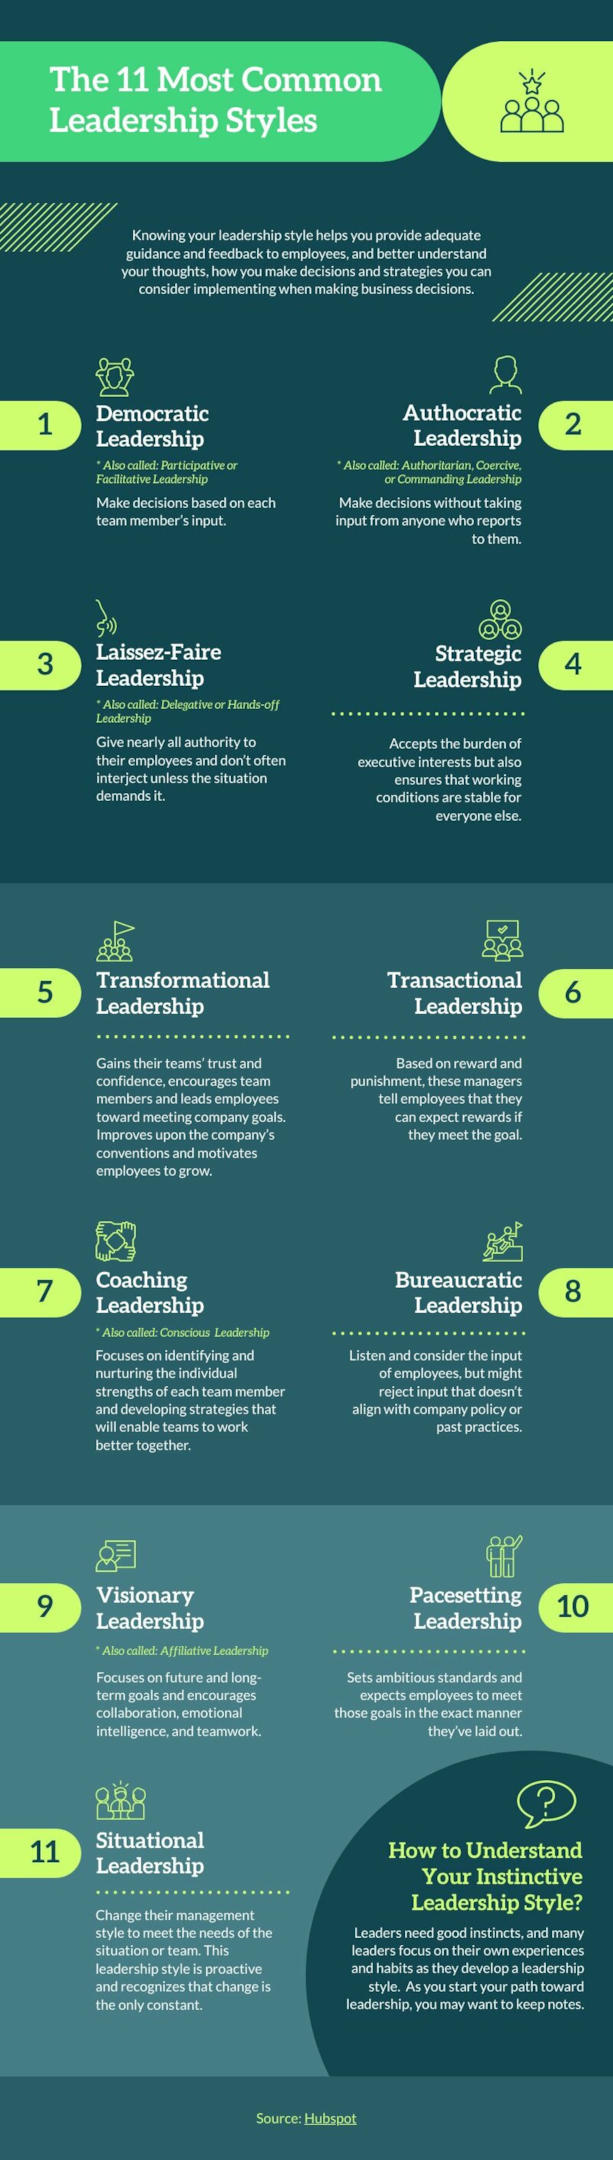 infographic about common types of leadership styles